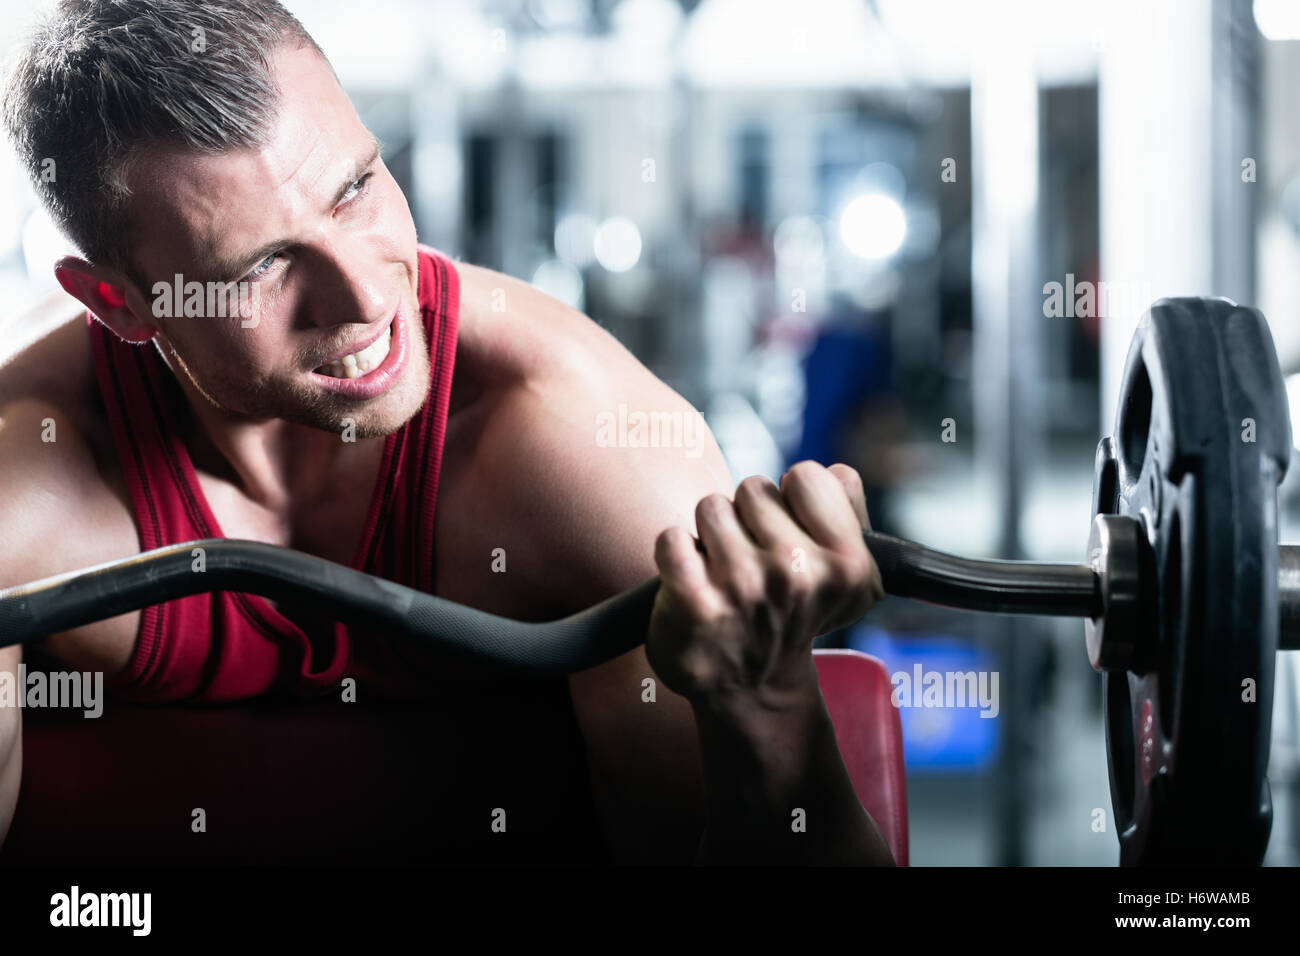 studio training bodybuilding fitnesscenter fitness man bodybuilder hand hands health spare time free time leisure leisure time Stock Photo